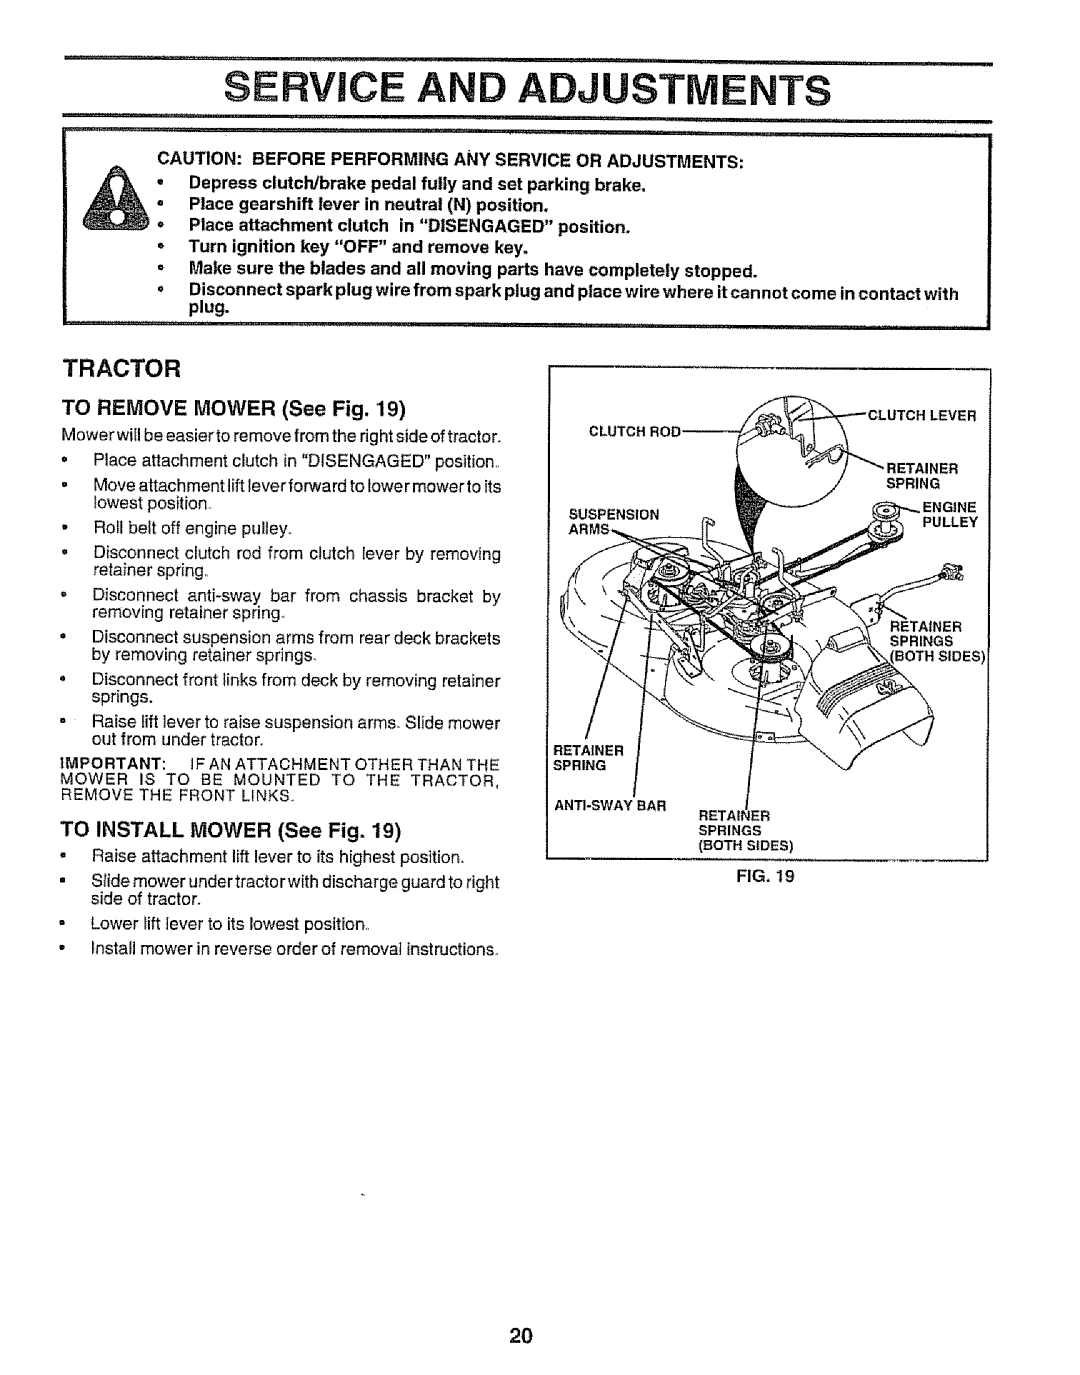 Sears 917.258542 owner manual Adjustments, Service, Tractor, TO REMOVE MOWER See Fig, TO INSTALL MOWER See Fig 